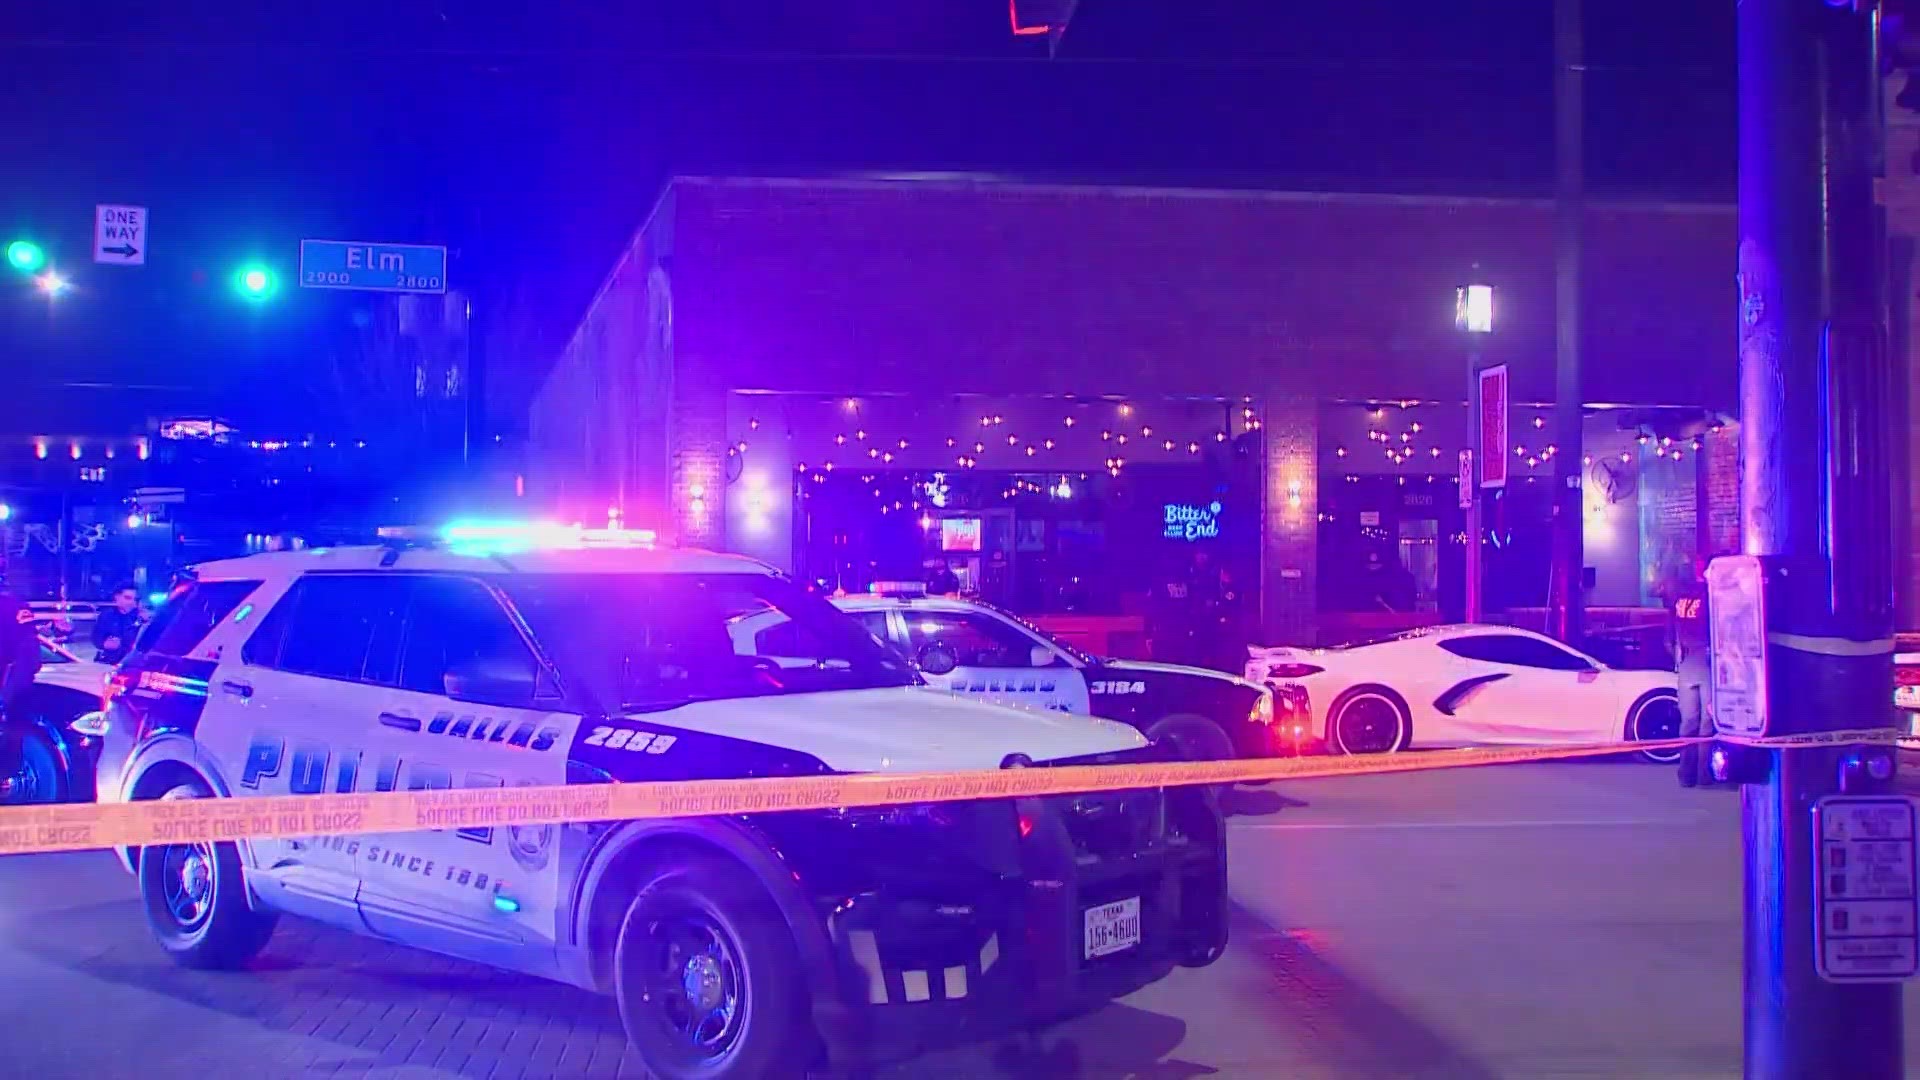 Dallas police said a man and woman were shot around at the Bitter End bar in the Deep Ellum area.